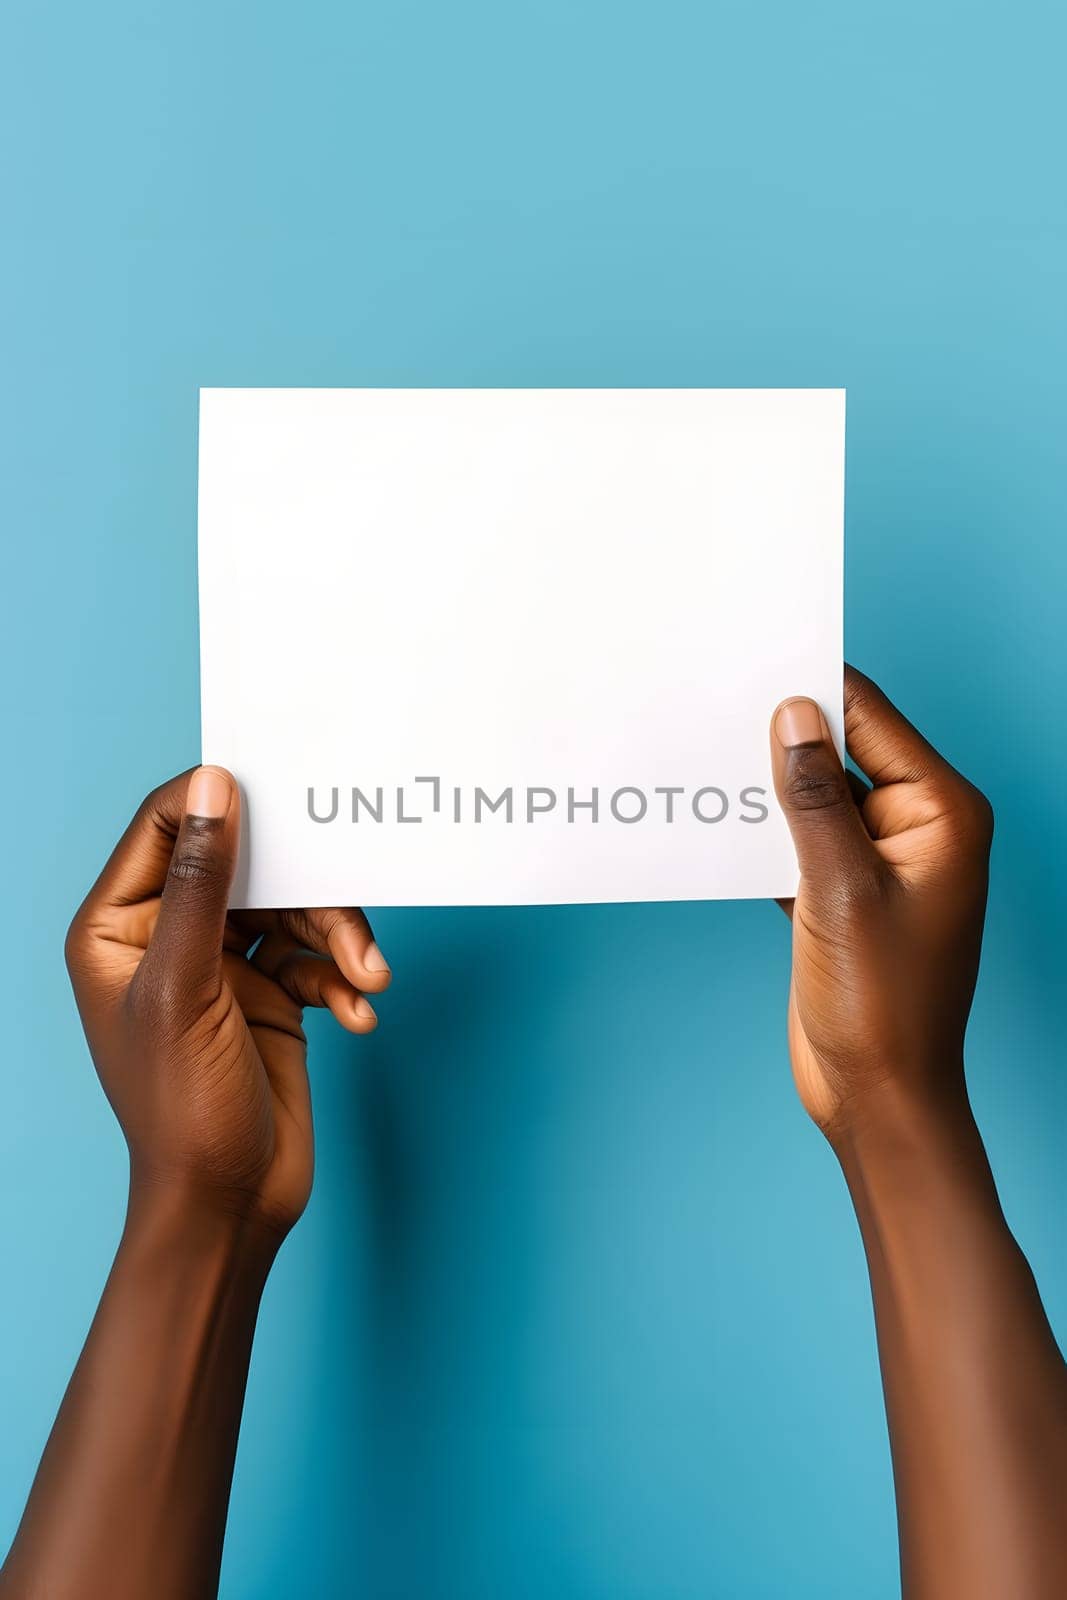 african american hands holding blank sheet of paper on blue background, neural network generated photorealistic image by z1b